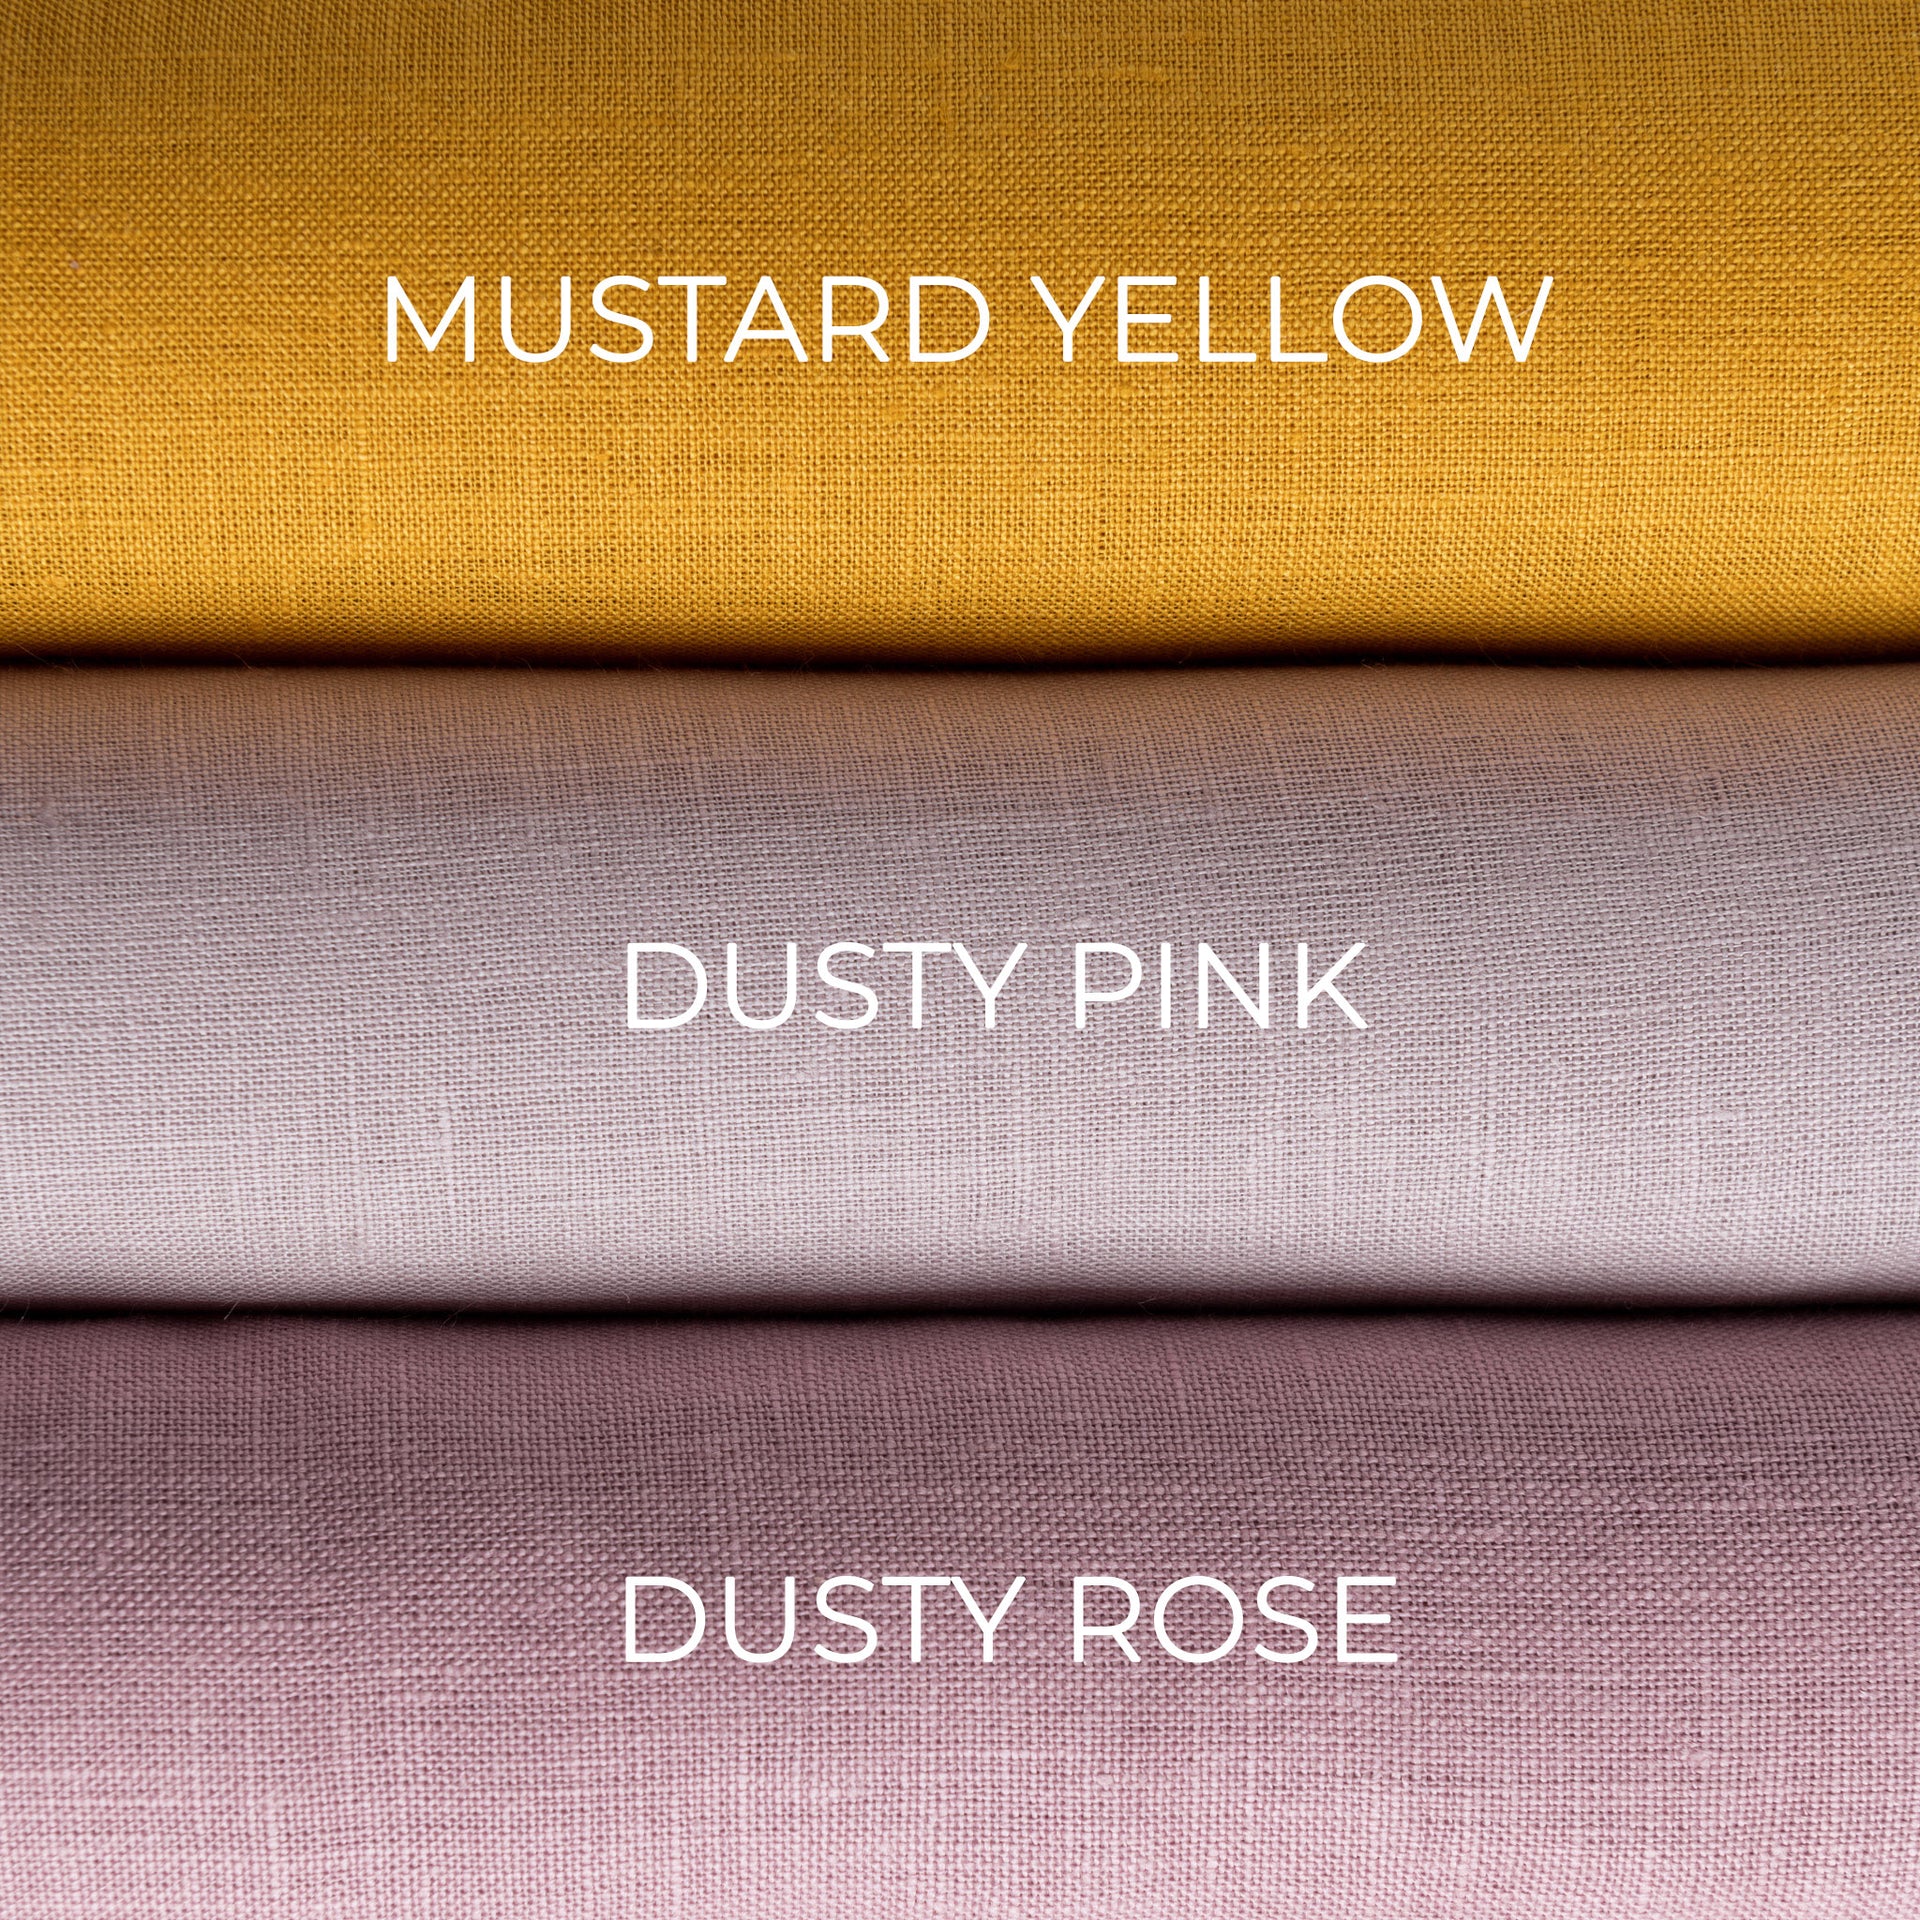 @Color: Mustard Yellow, color: Dusty Pink, color: Dusty Rose   TOP & BOTTOM COLOR: Mustard Yellow, TOP & BOTTOM COLOR: Dusty Pink, TOP & BOTTOM COLOR: Dusty Rose